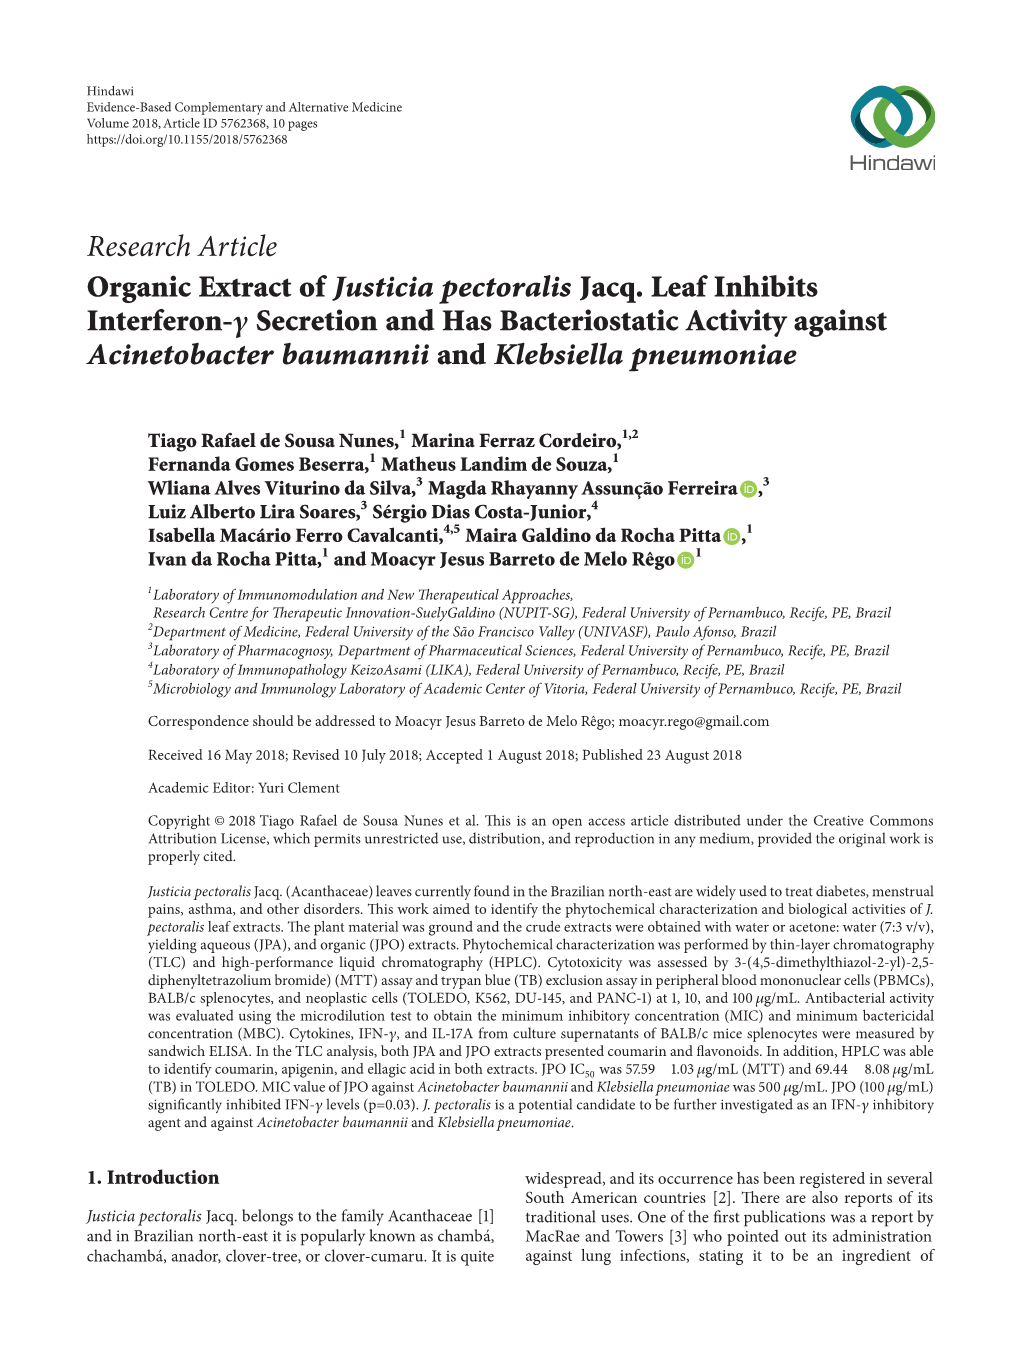 Research Article Organic Extract of Justicia Pectoralis Jacq. Leaf